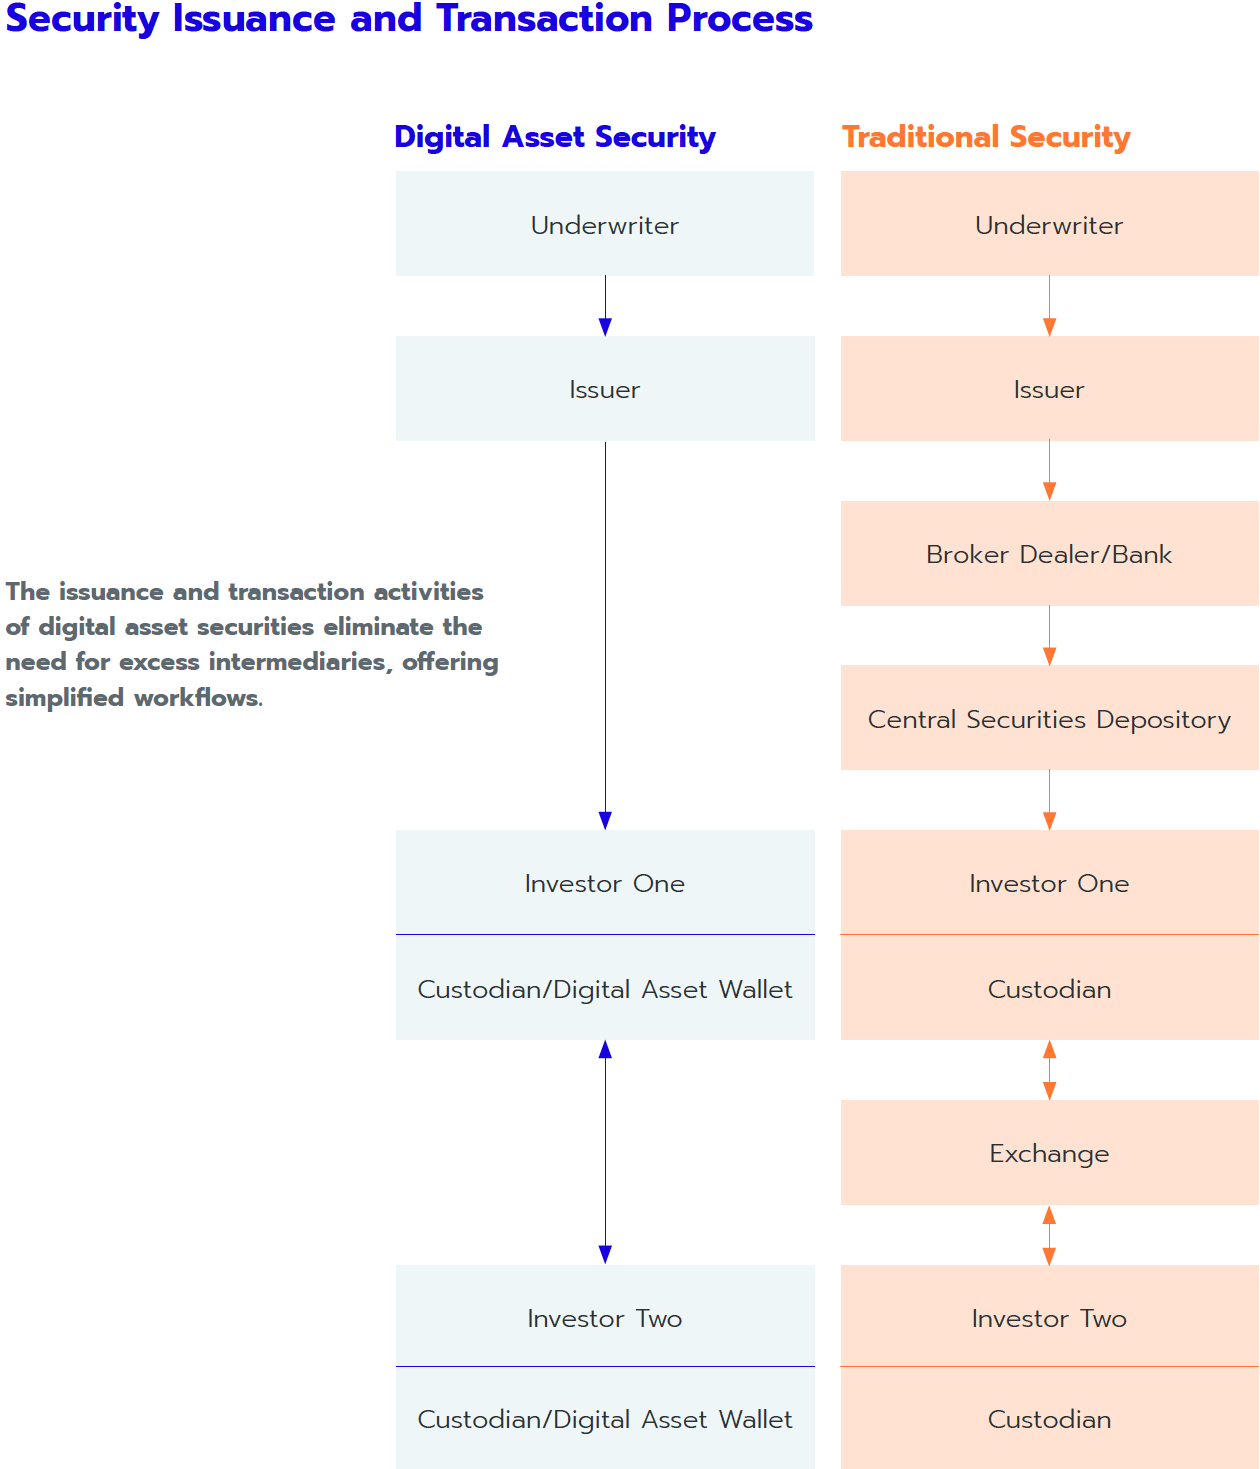 Security Issuance and Transaction Process